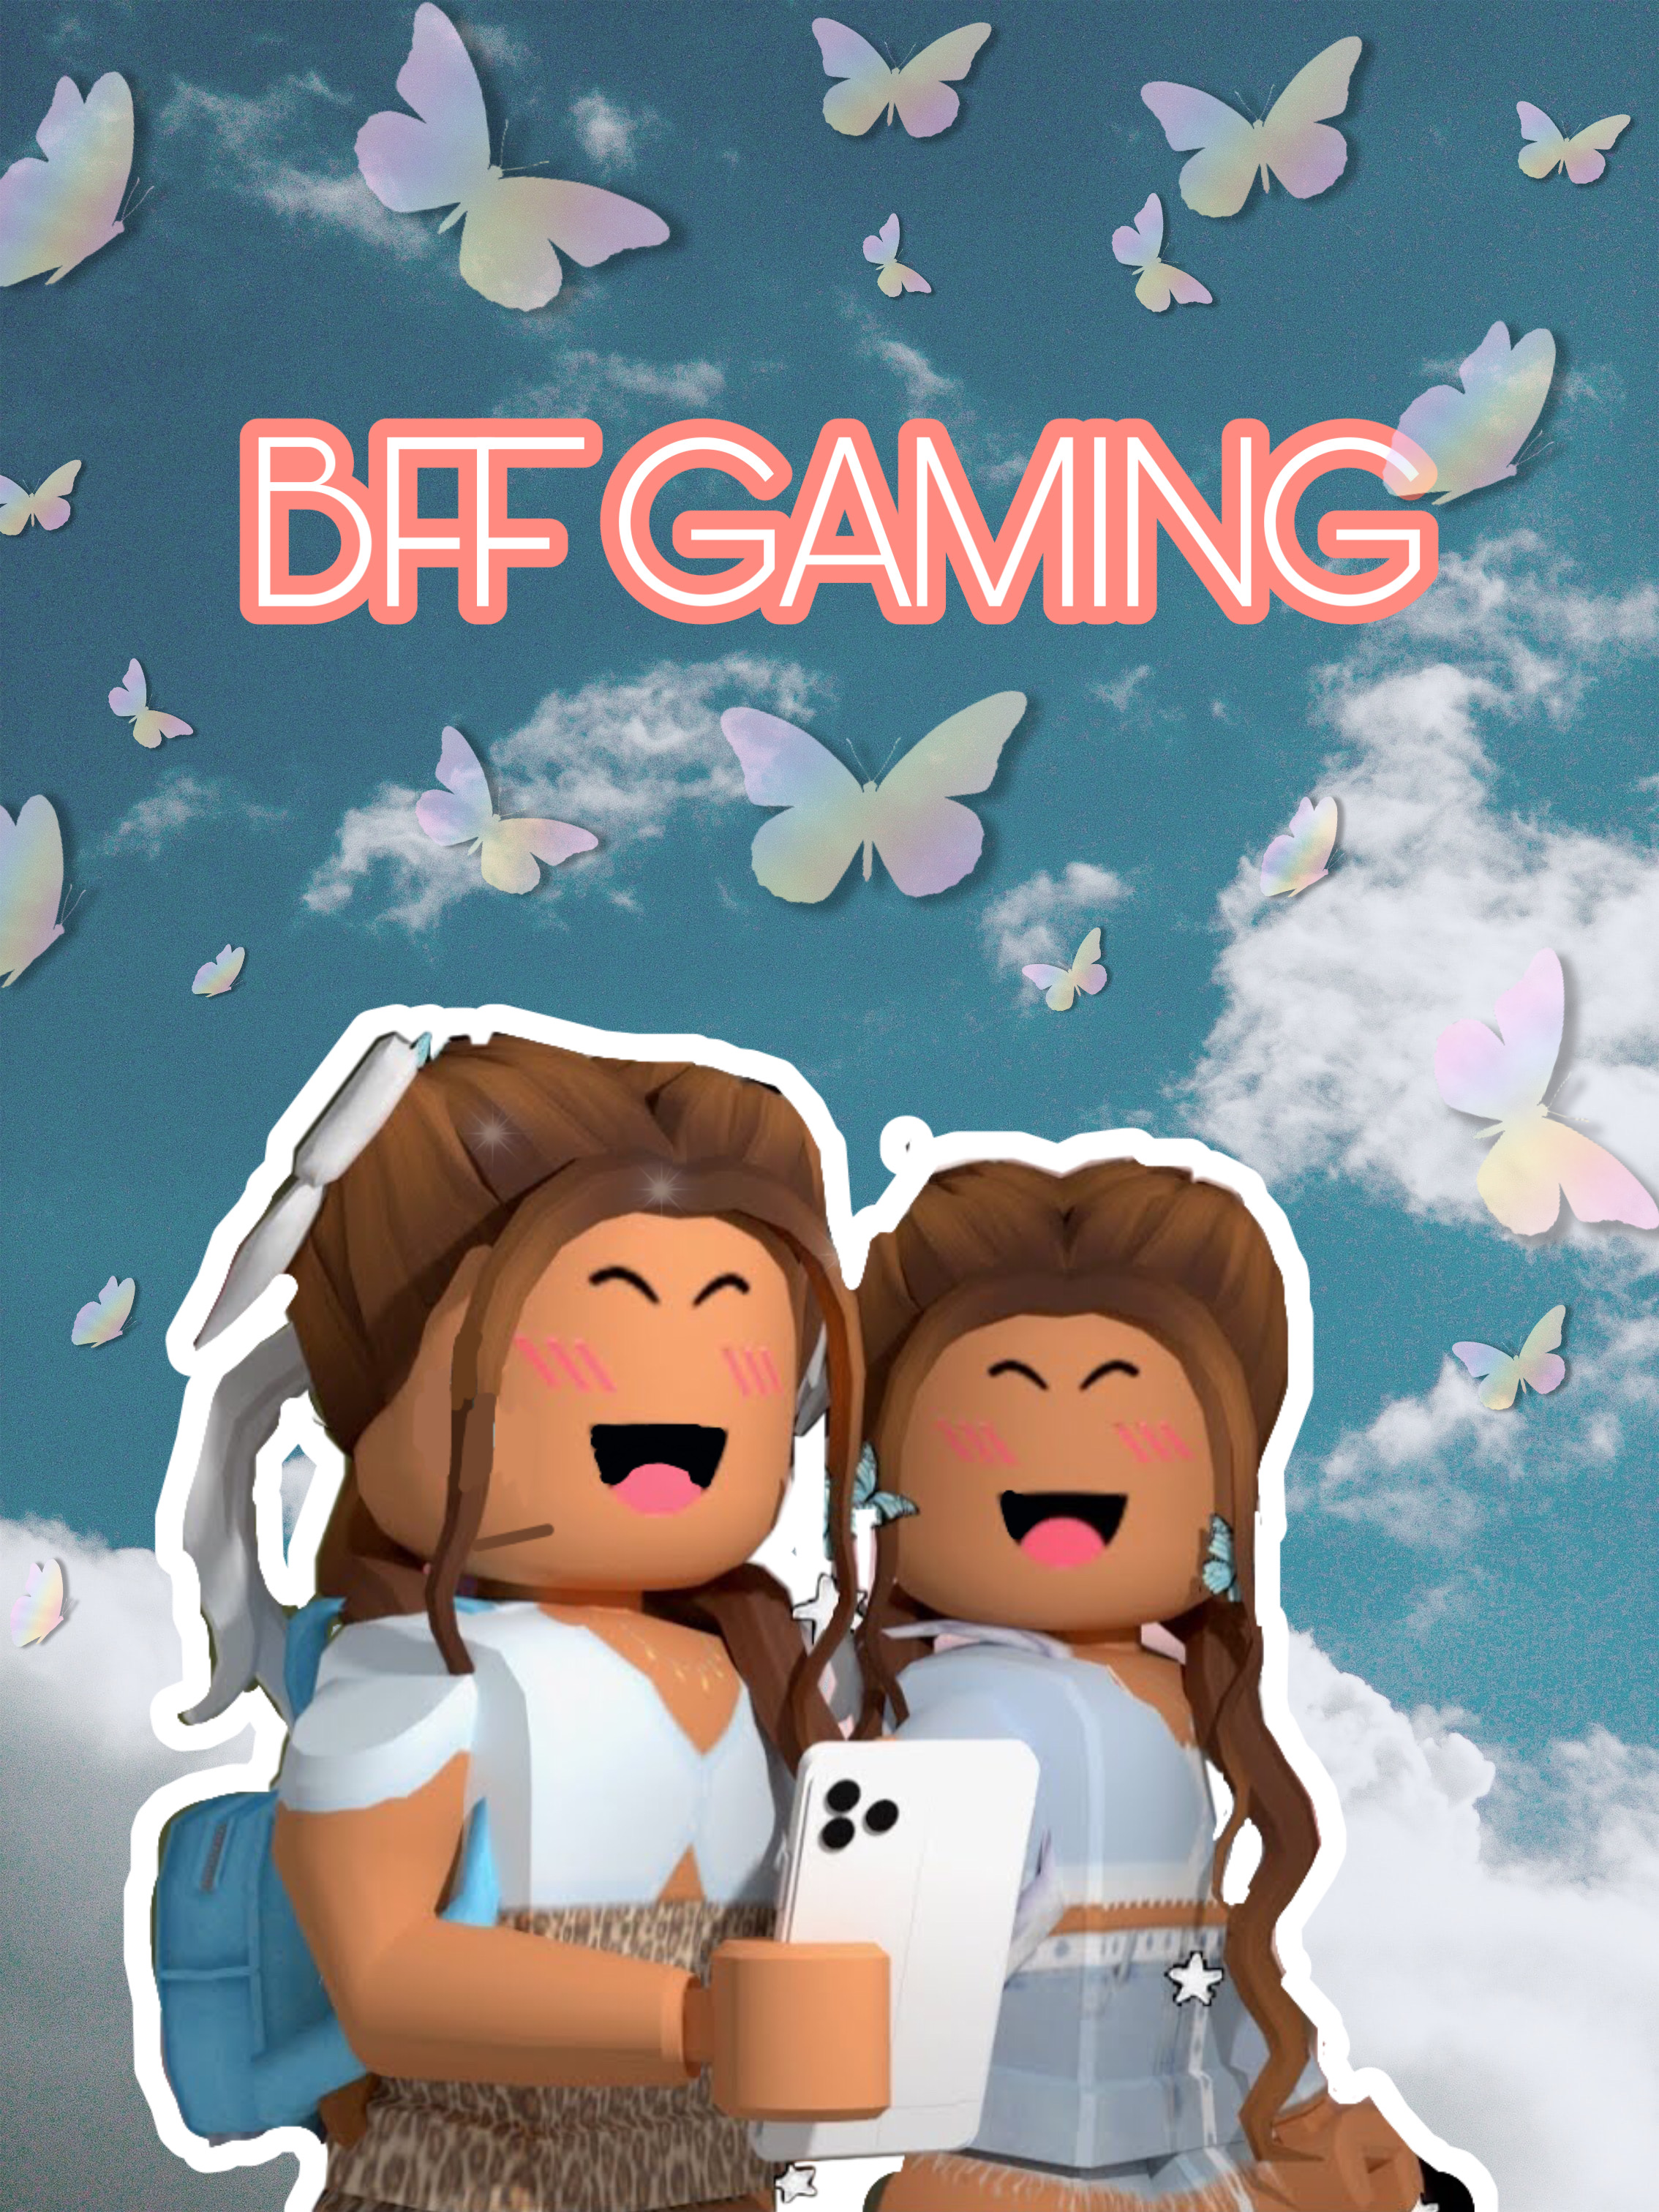 Image By Laraabboalyassi - roblox girls pictures bff